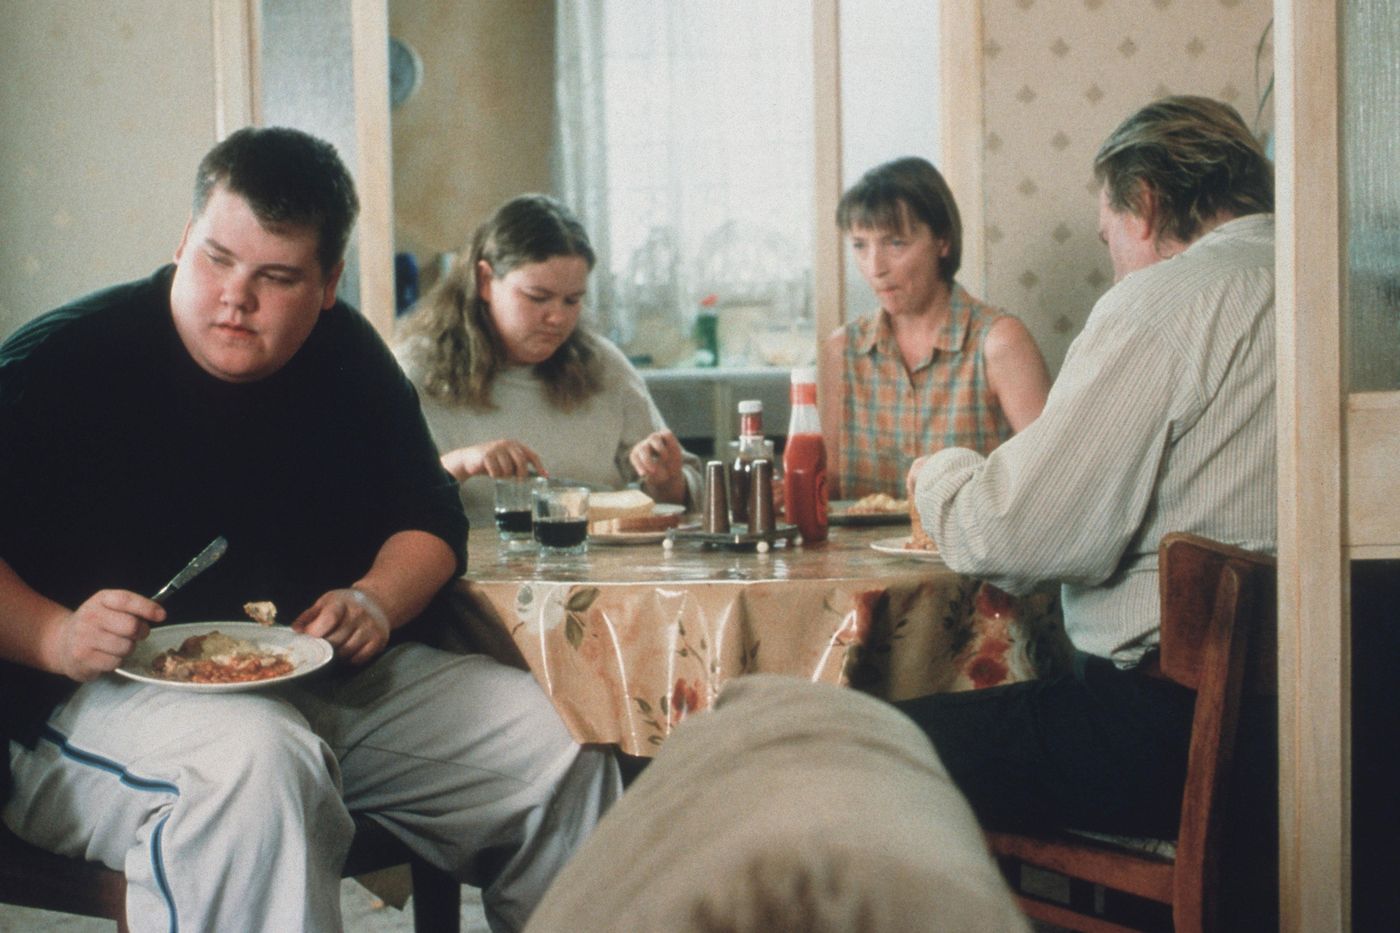 All or Nothing - Mike Leigh's 2002 film re-examined